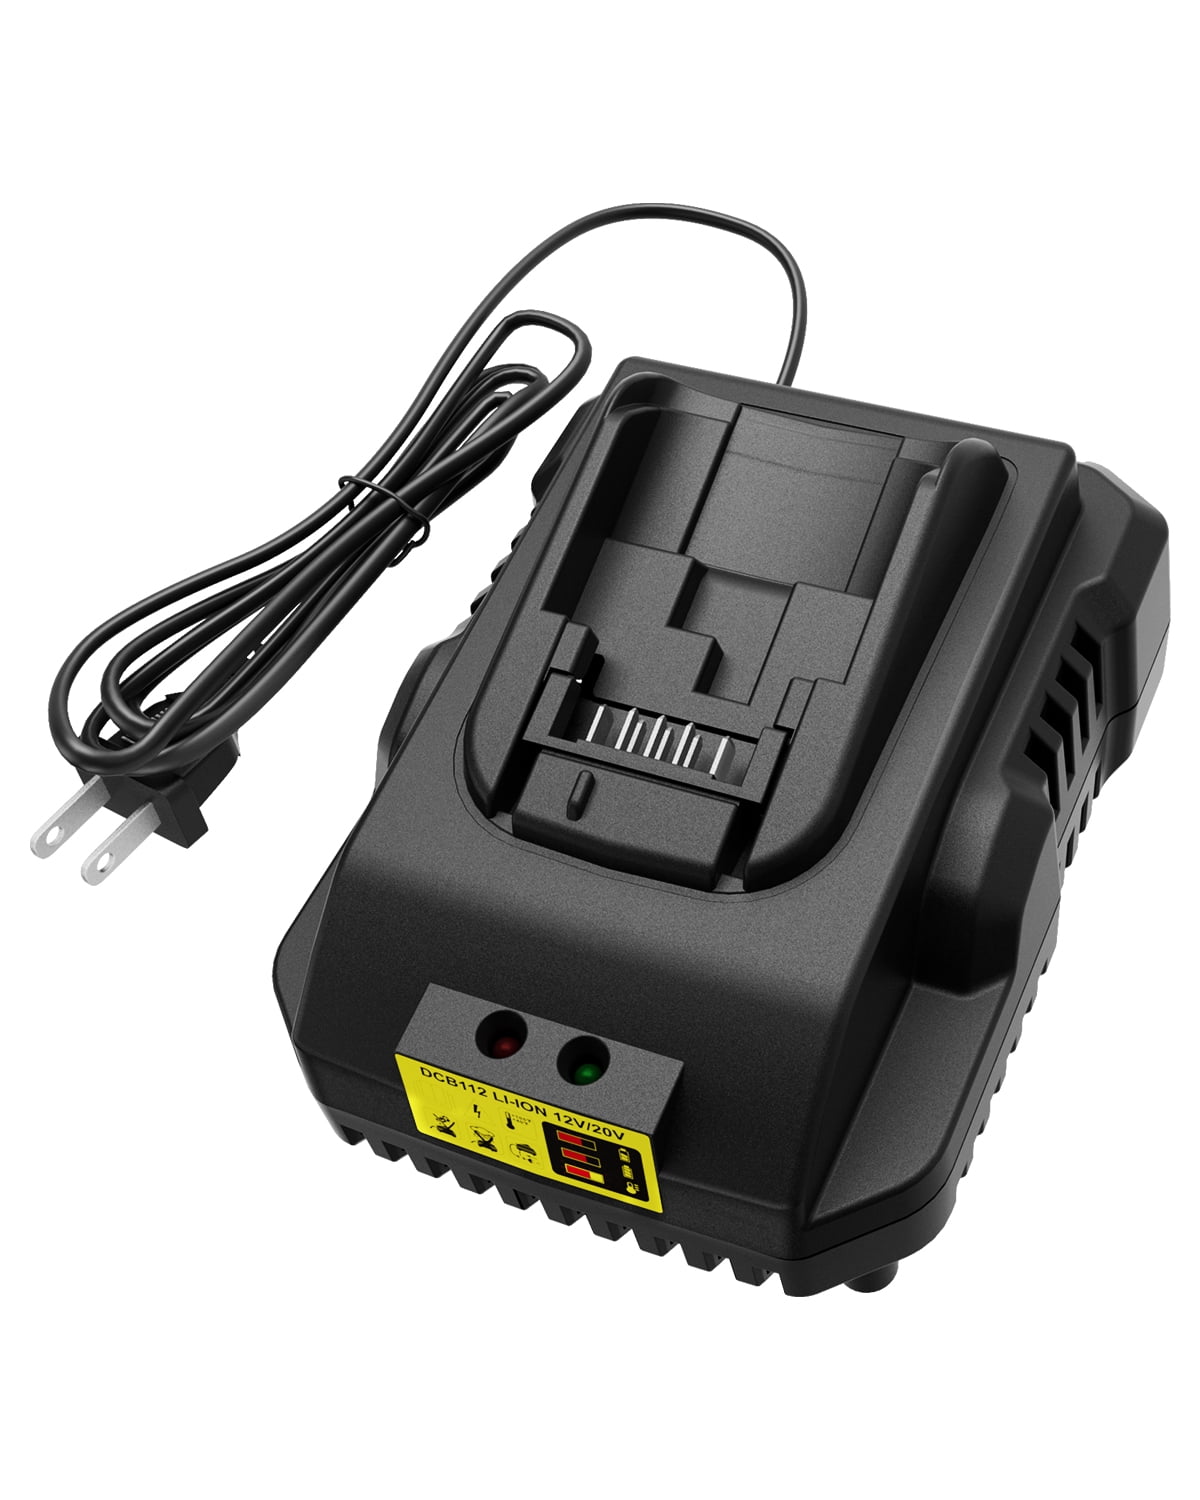 DC9310 Fast Battery Charger DW9116 DC9320 DC9319 for Dewalt 7.2V-18V XRP  NI-CD NI-MH Battery DC9096 DC9098 DC9099 DC9091 DC9071 DE9057 DW9096 DW9094  DW9072 (Yellow) 